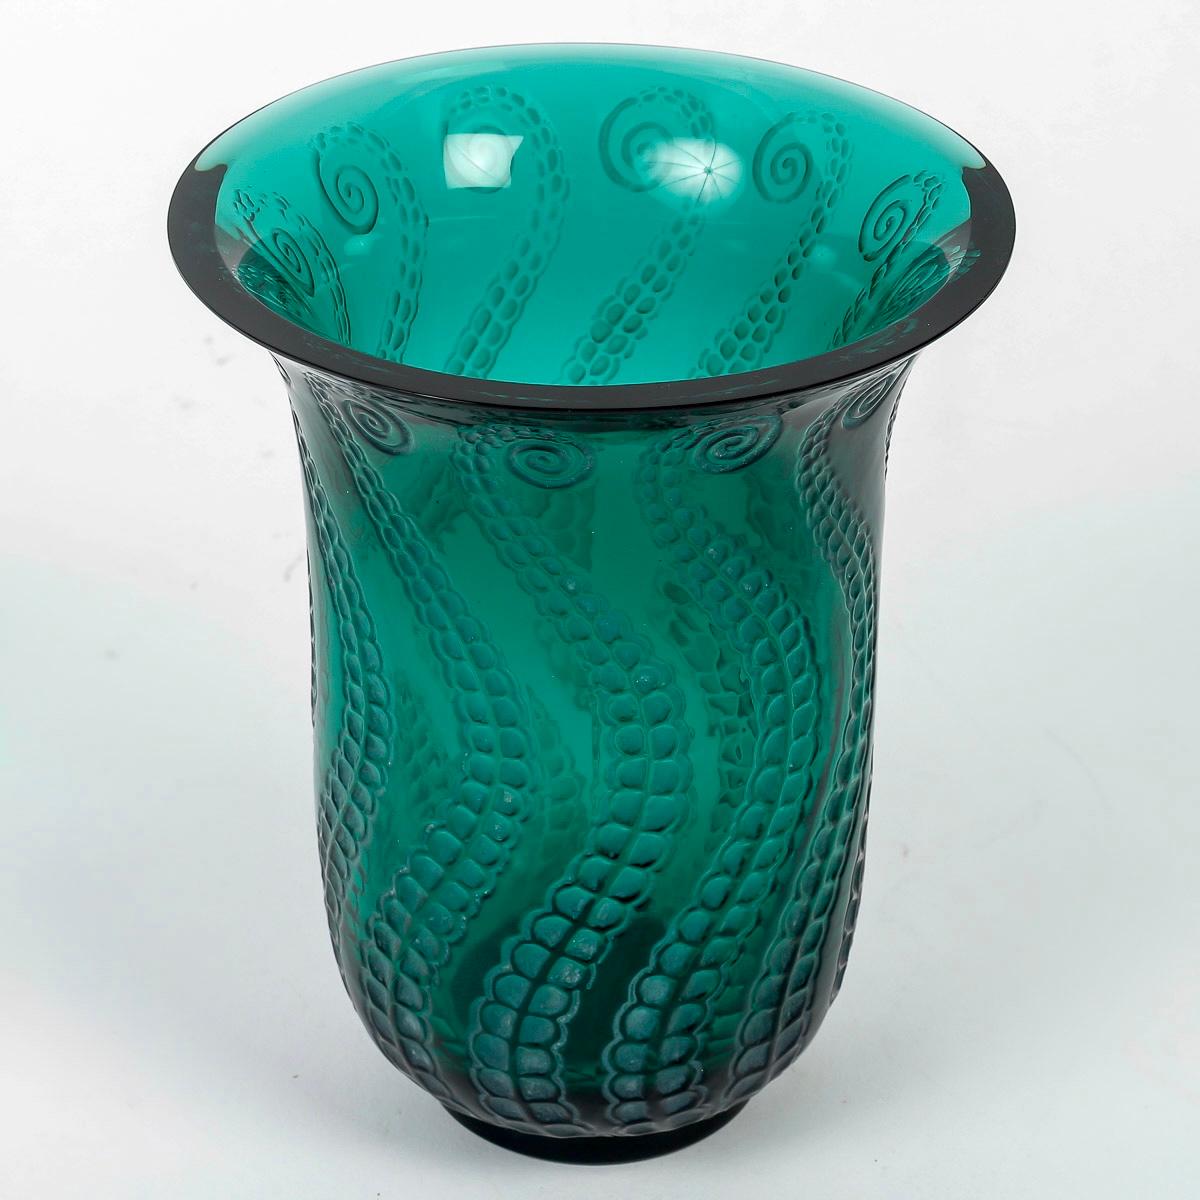 Art Deco 1921 Rene Lalique Vase Meduse Emerald Green Glass with White Patina For Sale